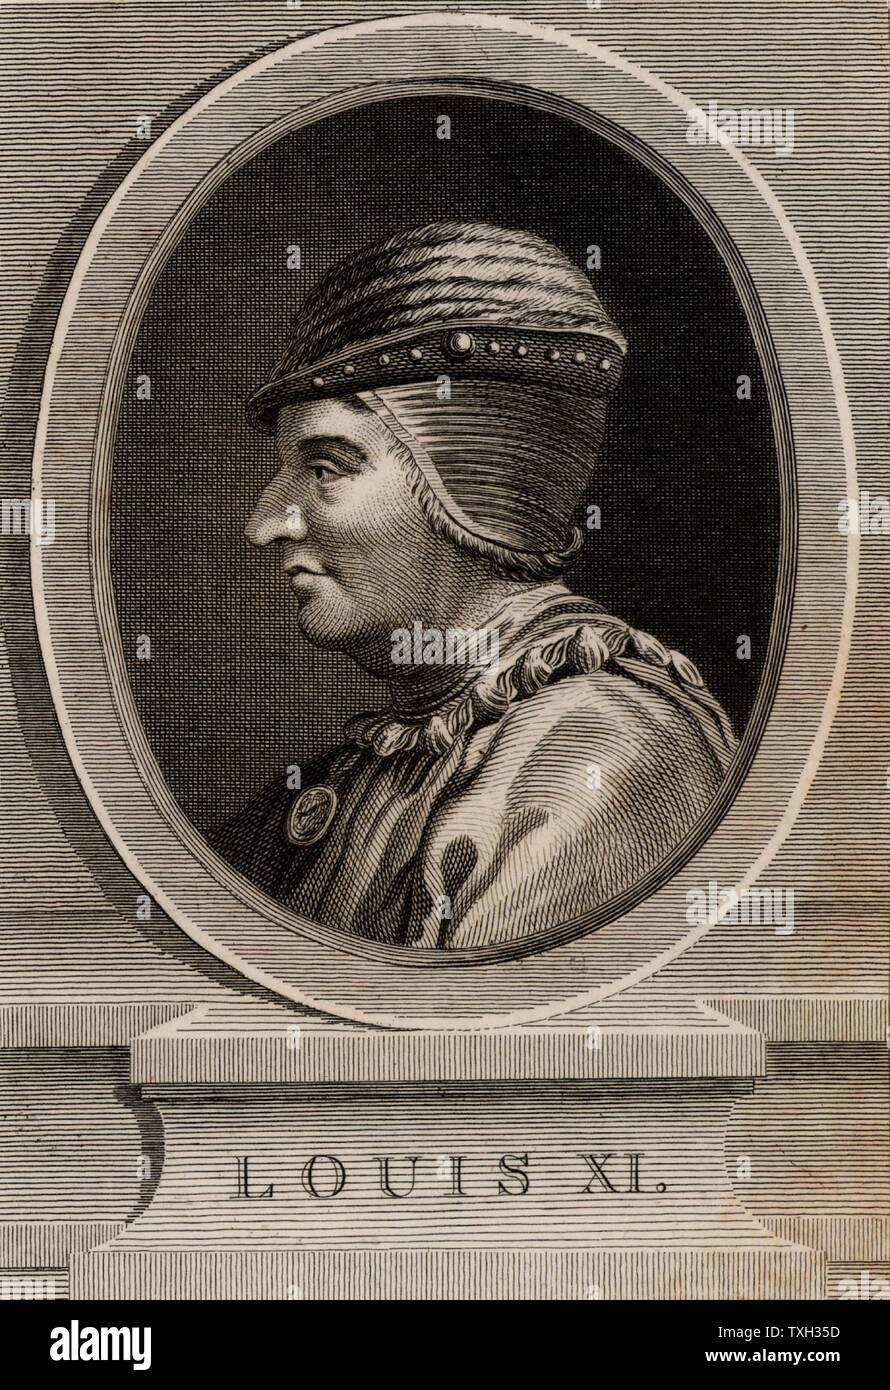 Louis XI (1423-83) a member of the Valois dynasty, king of France from 1461.  Copperplate engraving, 1793. Stock Photo